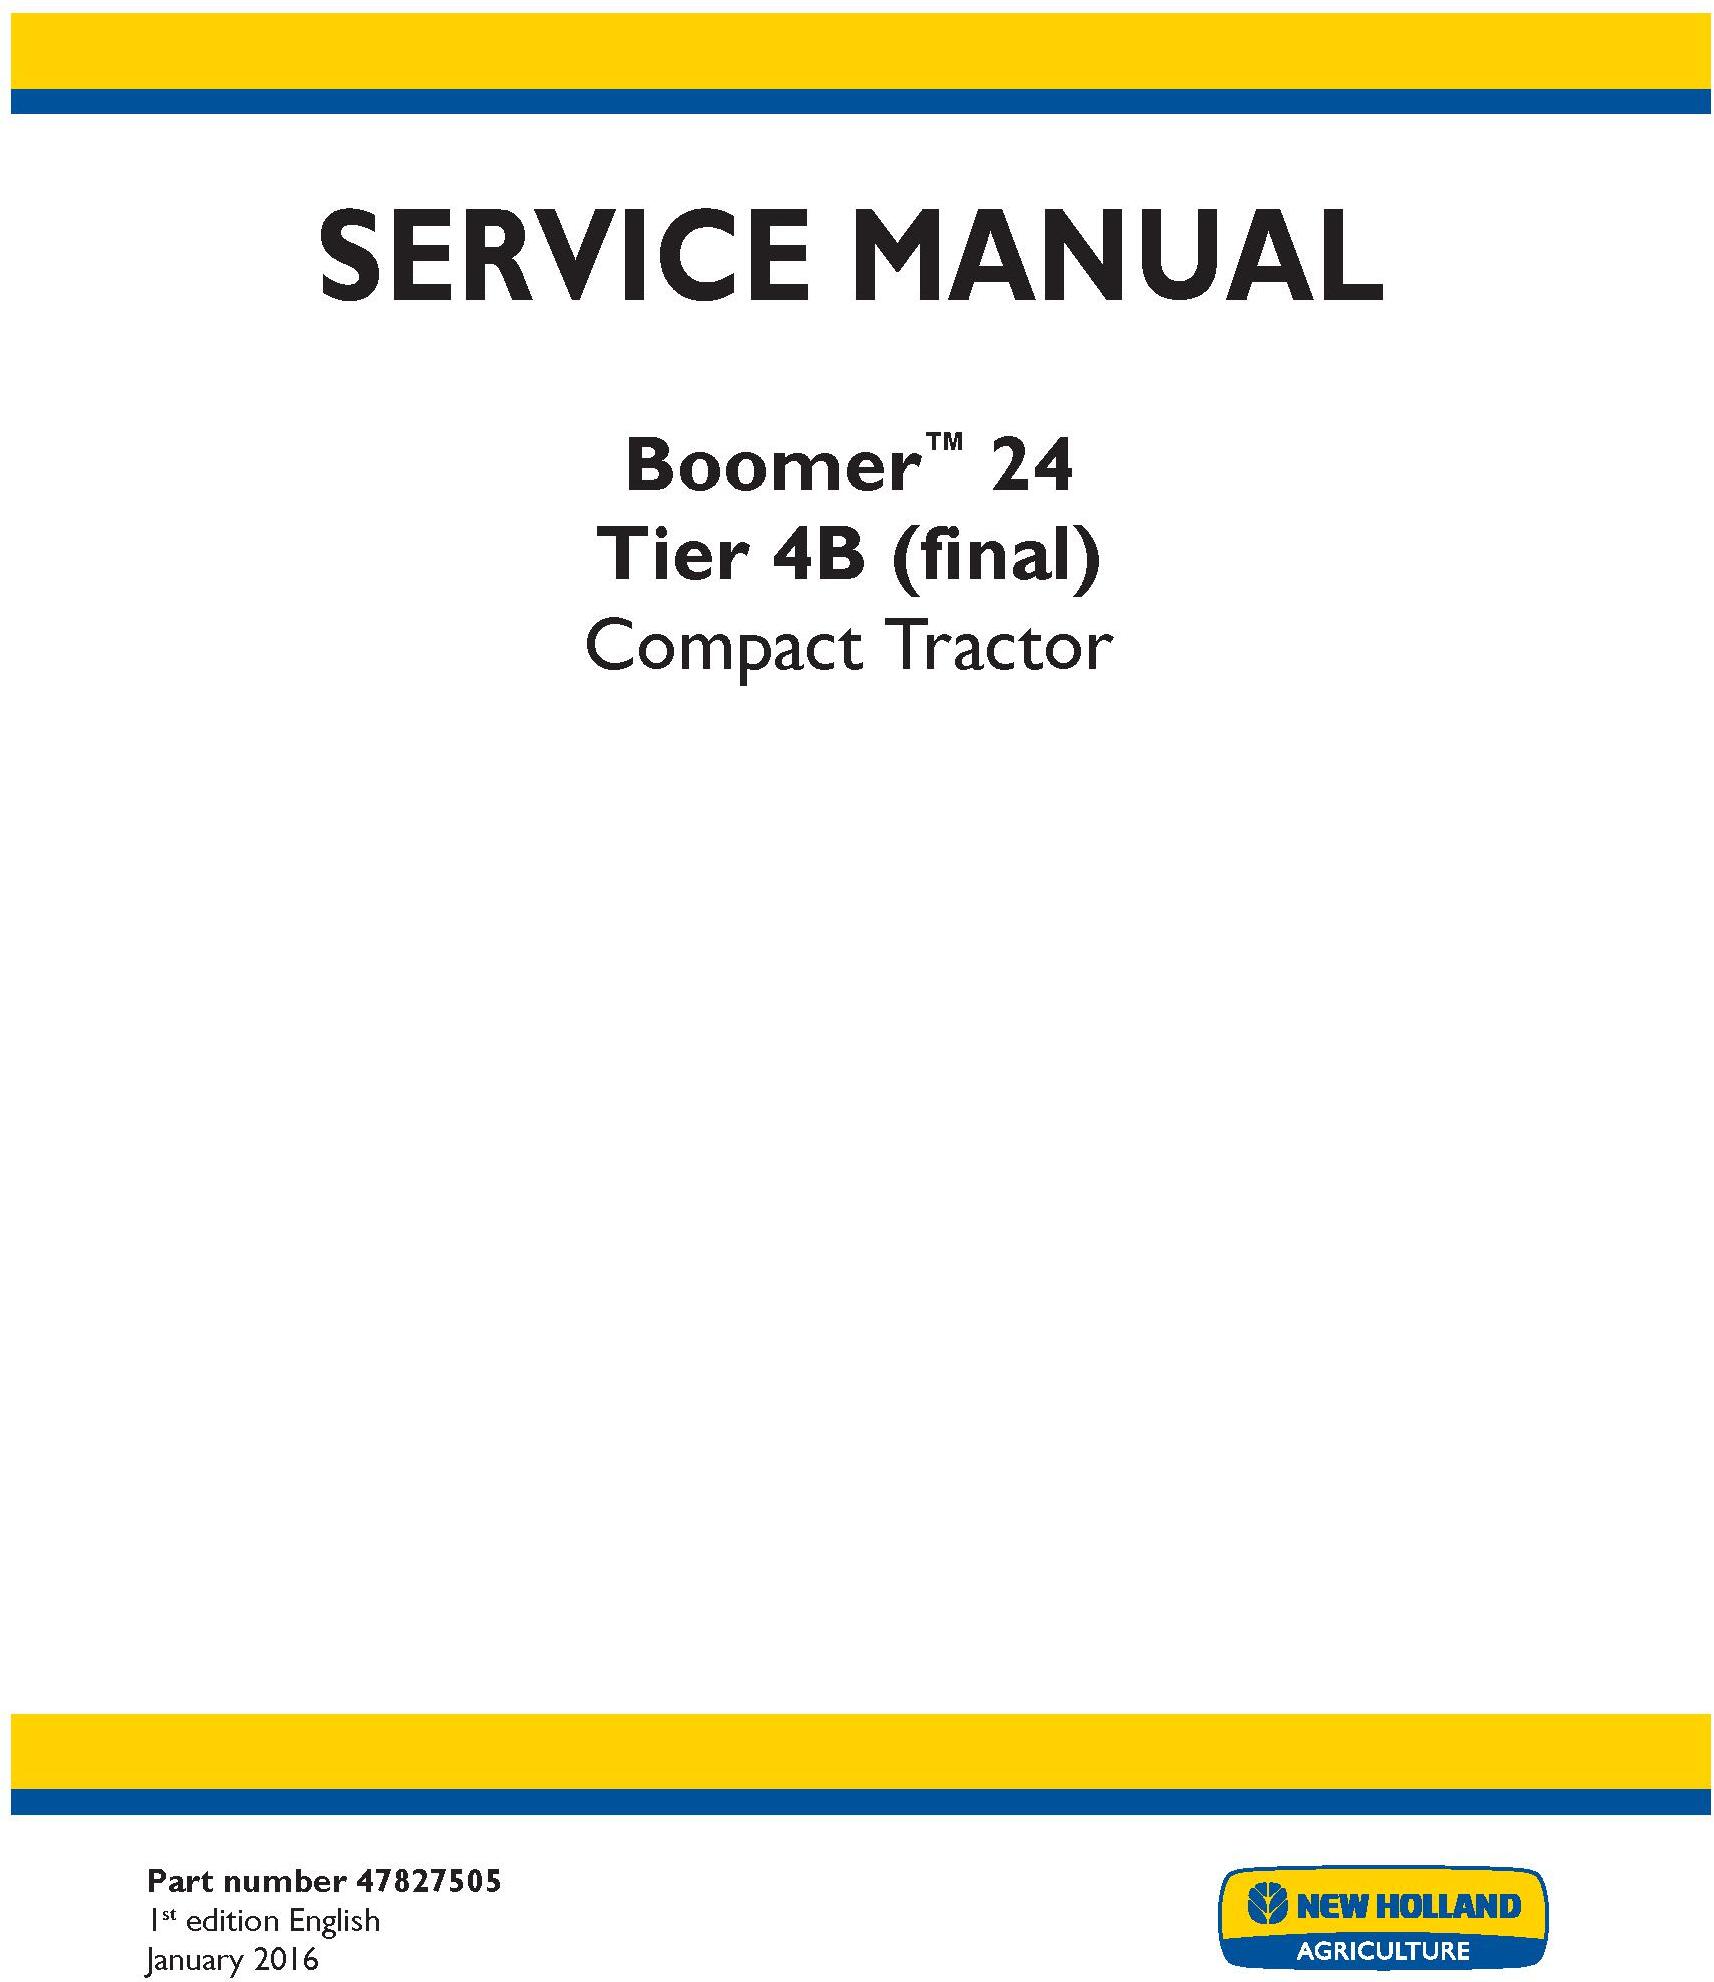 New Holland Boomer 24 Tier 4B final Tractor Complete Service Manual (North America) - 19418